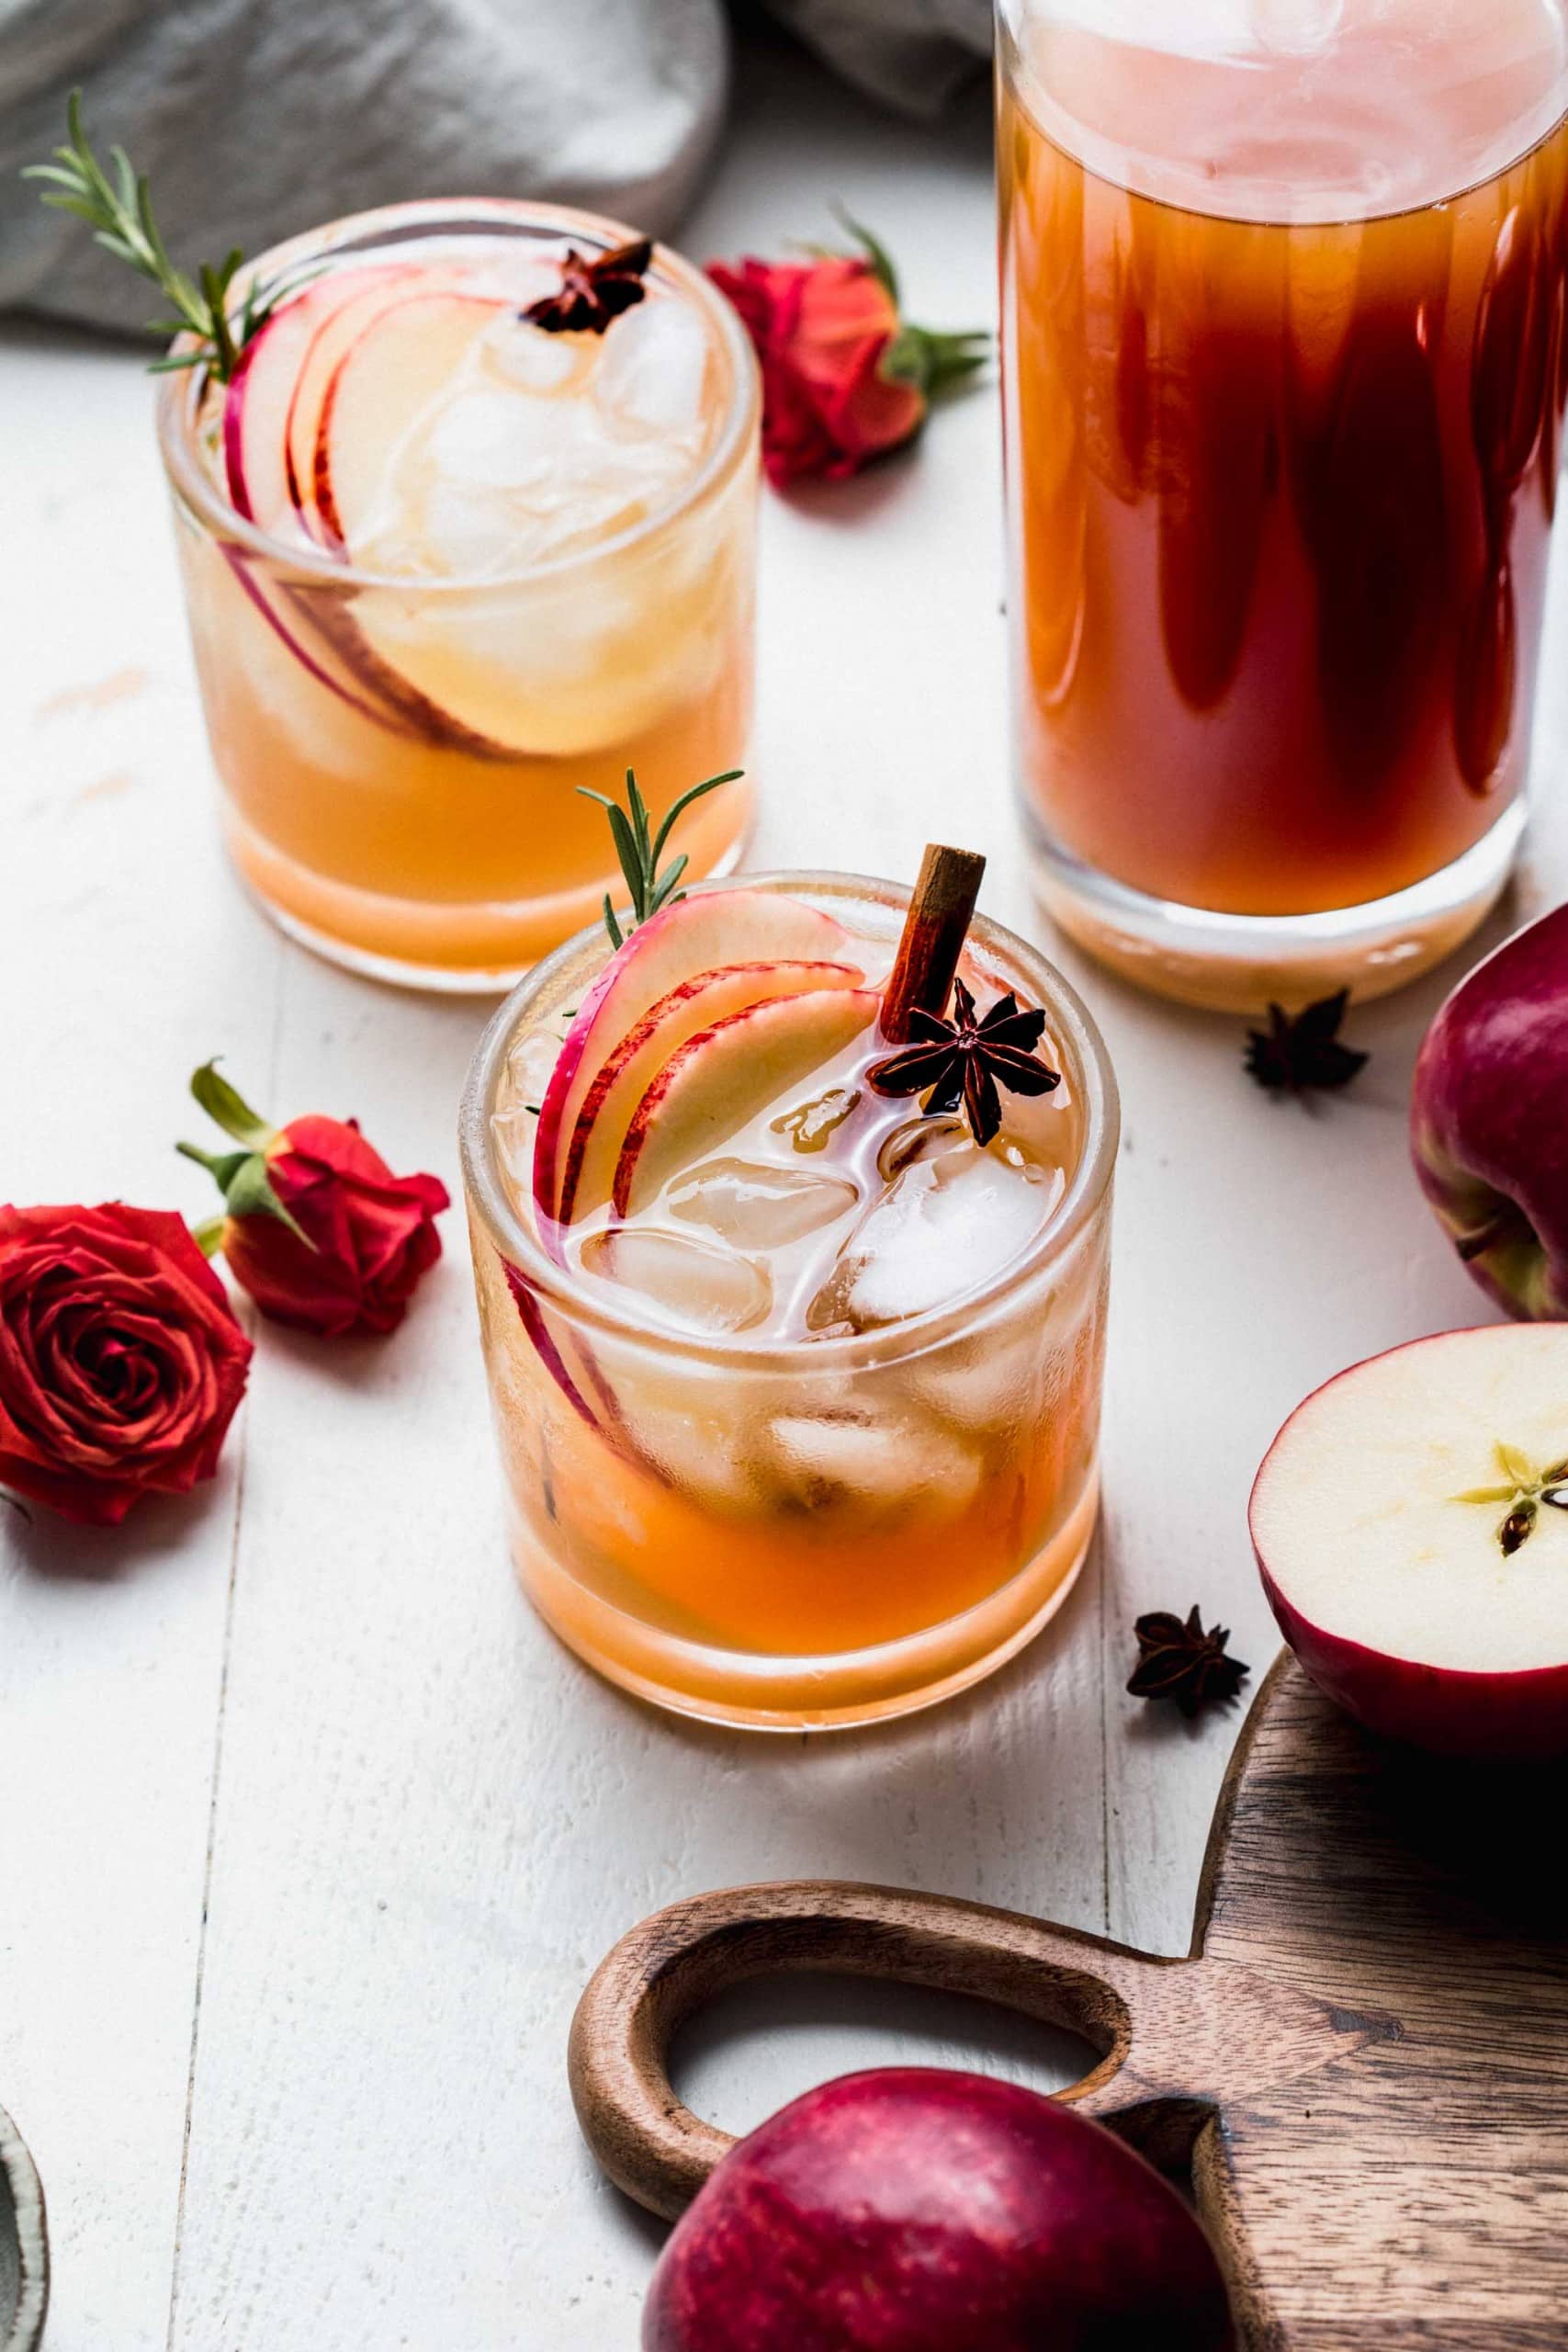 Side view of two apple cider cocktails next to jug of cider and red roses.